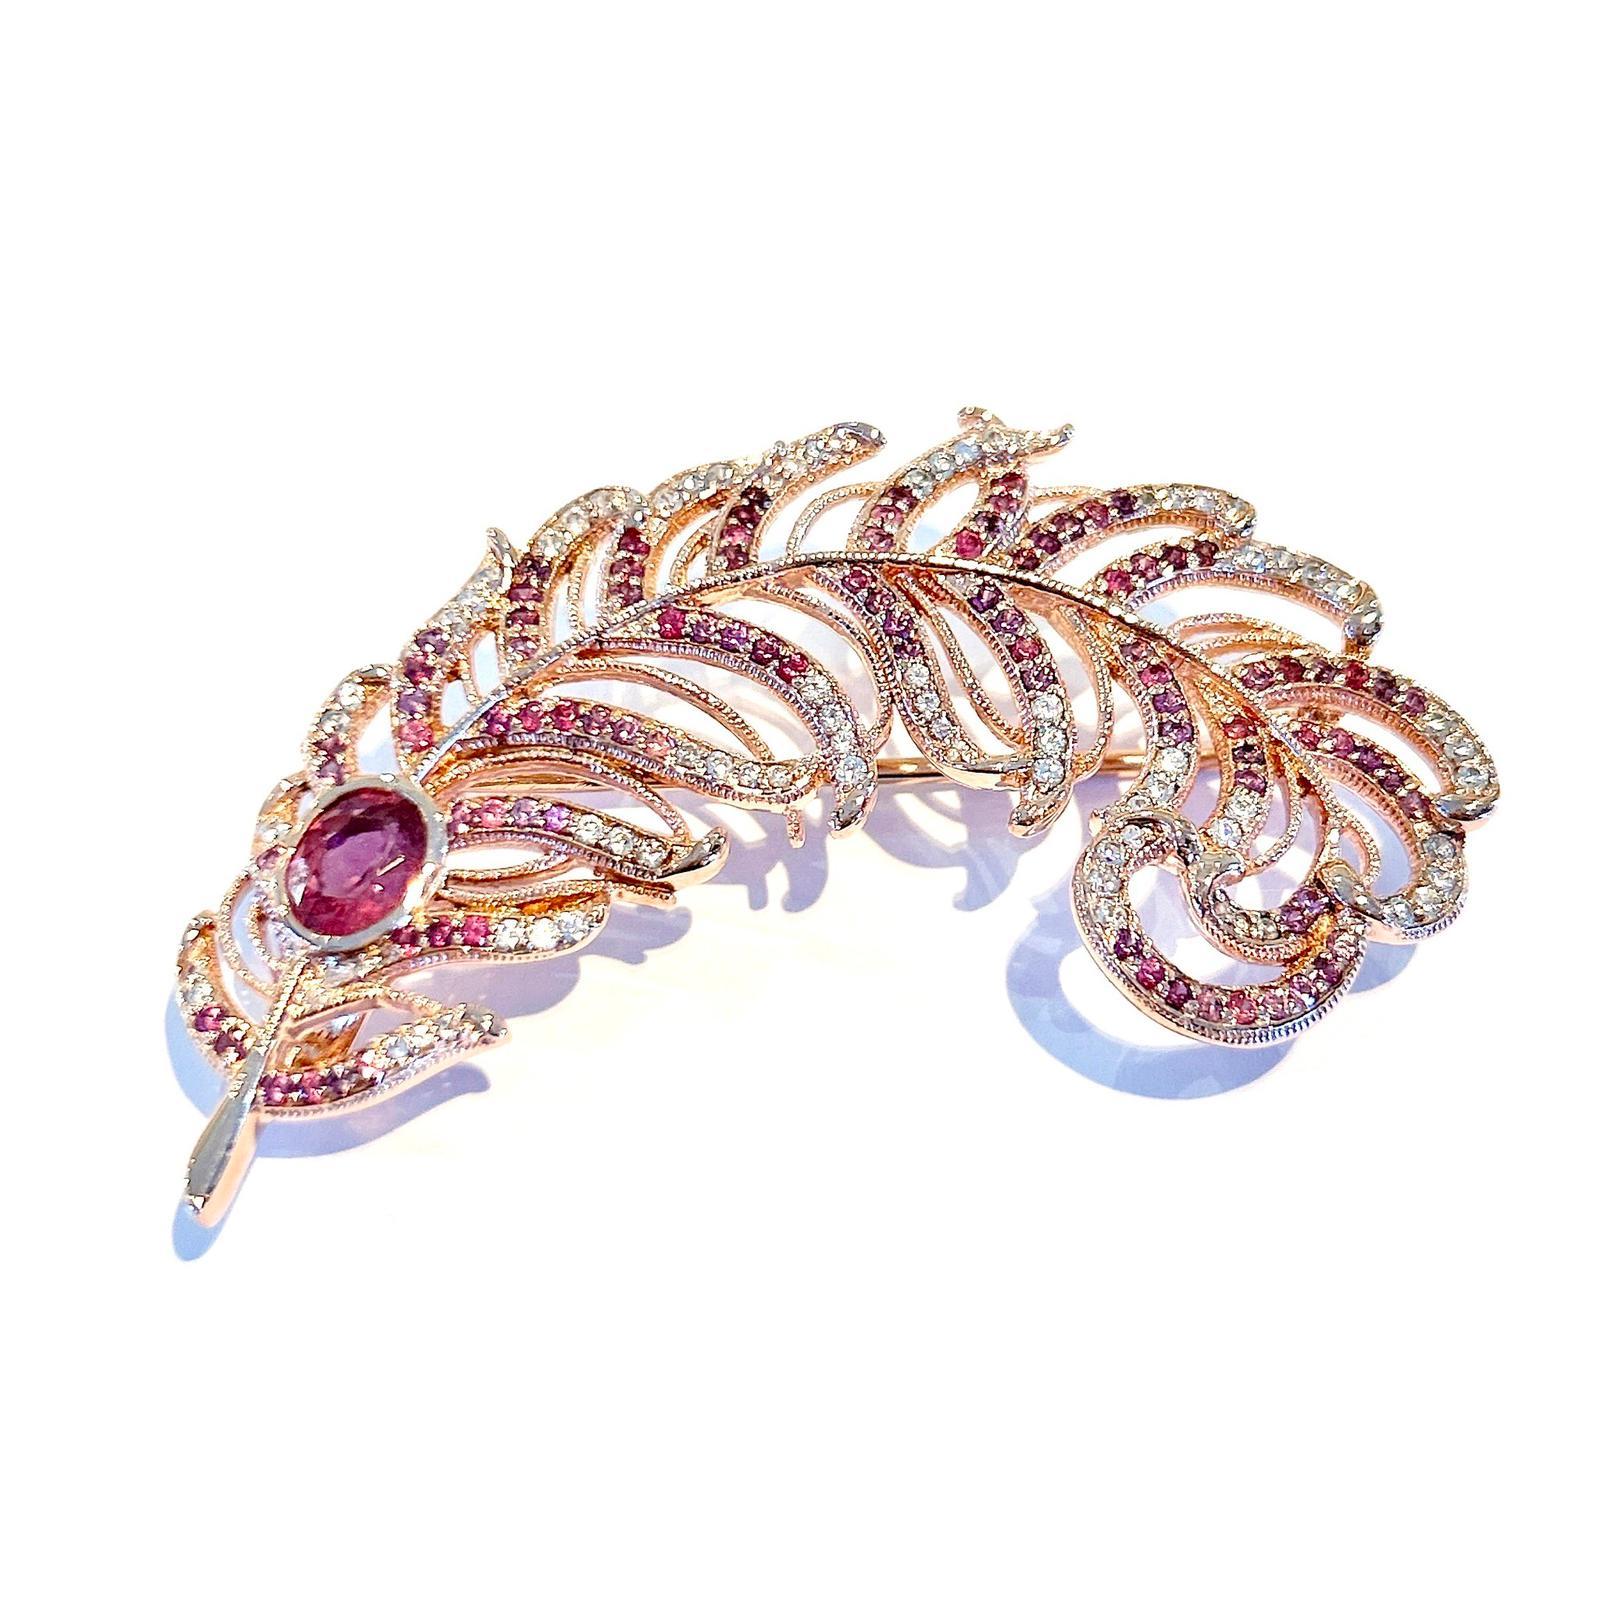 Bochic Brooch 
Style “Orient”
Natural Deep Wine Oval shape  Rodorite - 9 carats, set in the center 
Mix Natural Pink Sapphire from Sri Lanka, White Topaz and Deep wine Rodorite round brilliant gems 
Approx carat weight - 14 
Set in 22K Pink Gold and